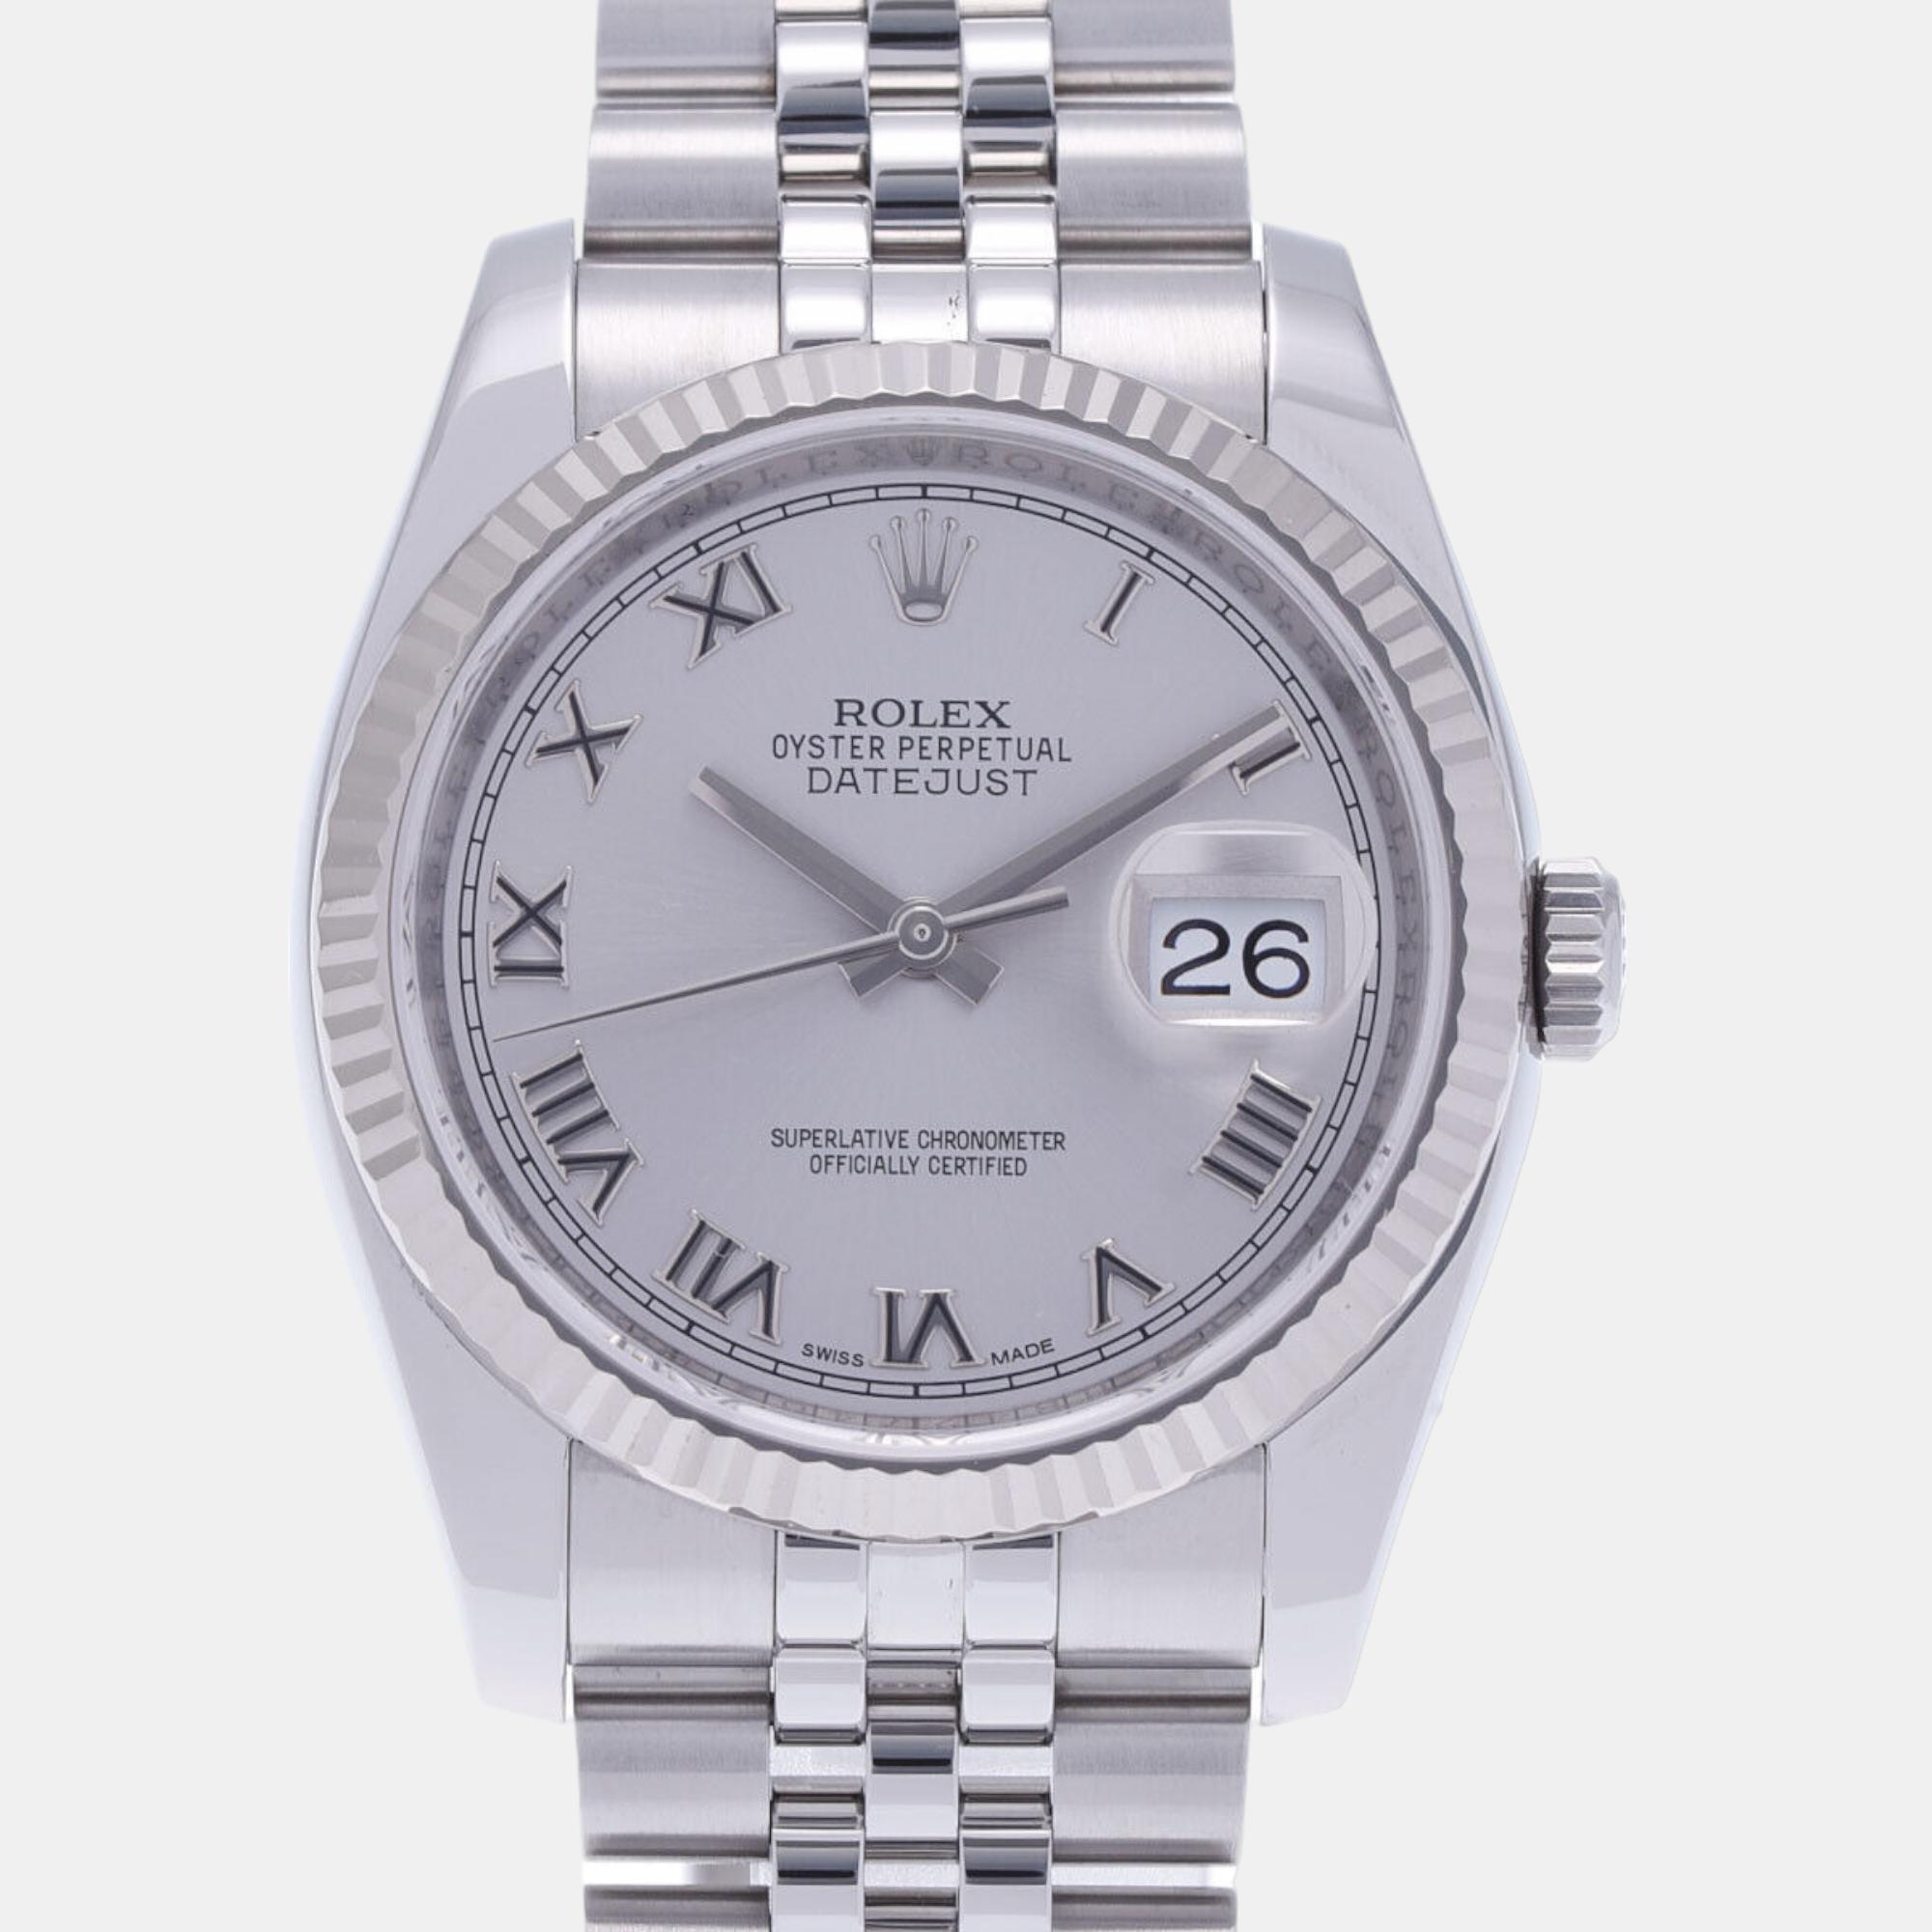 Rolex White 18k White Gold And Stainless Steel Datejust 116234 Automatic Men's Wristwatch 36 Mm